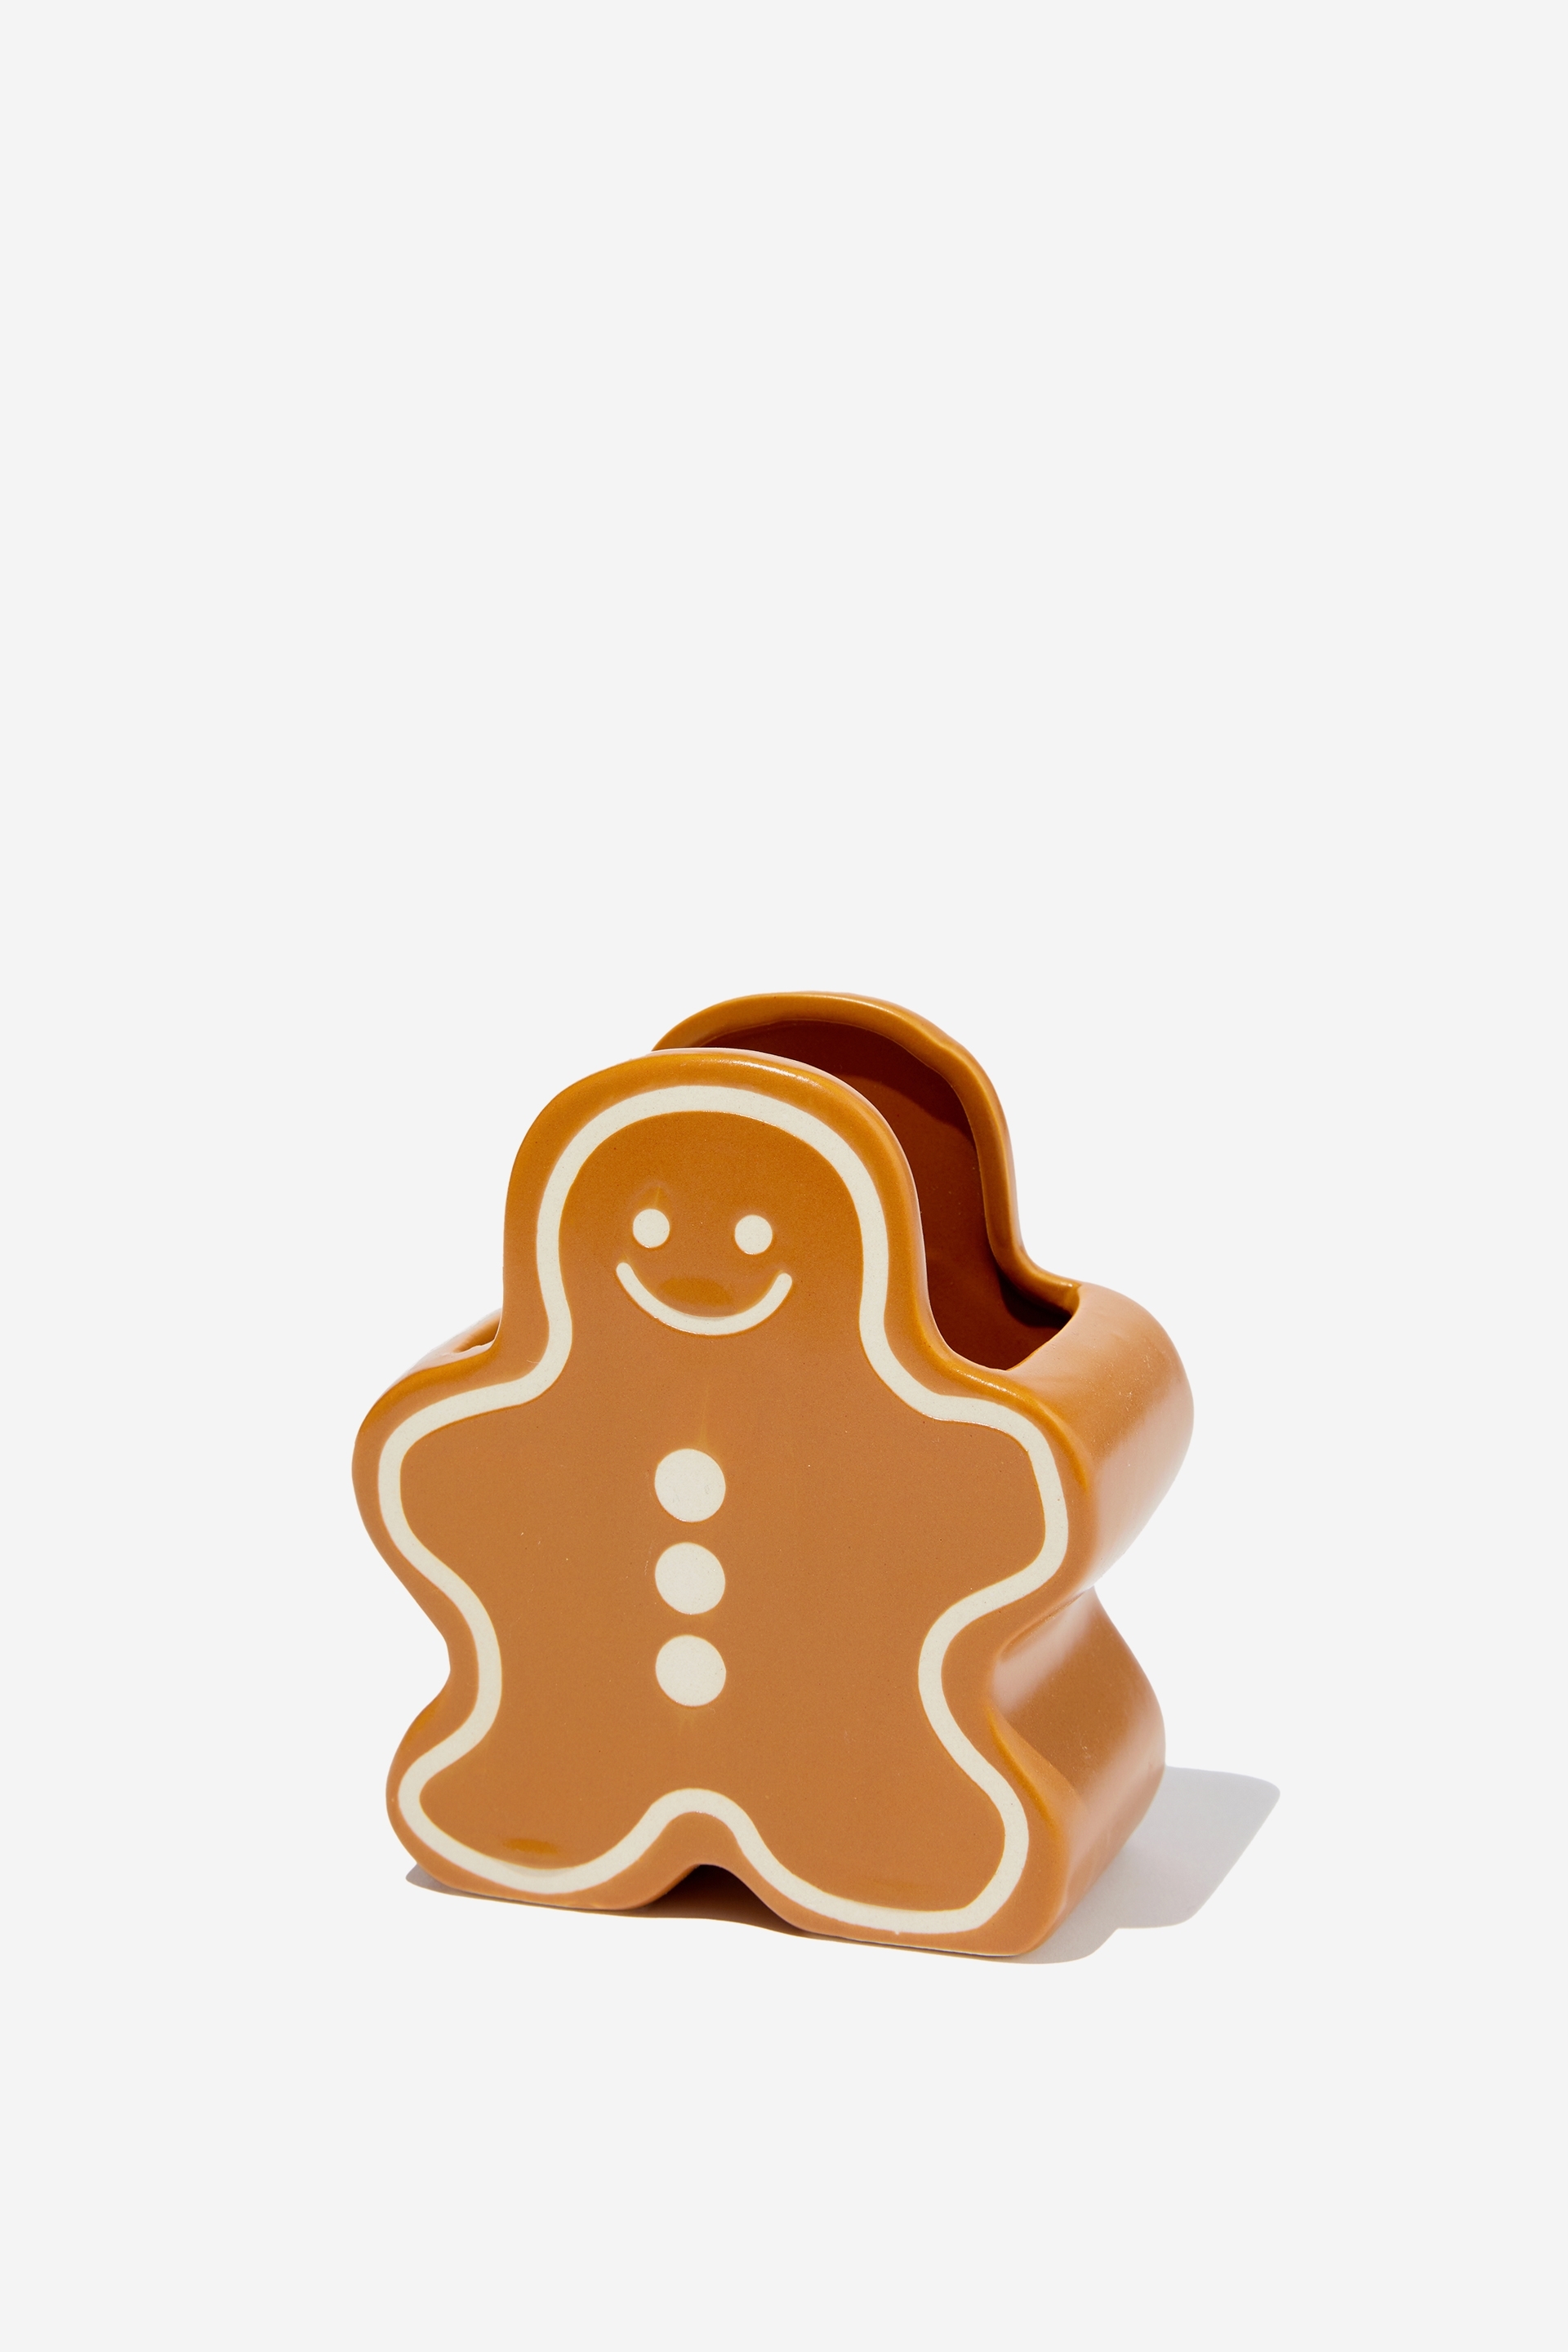 Typo - Pen Holder - Christmas gingerbread person